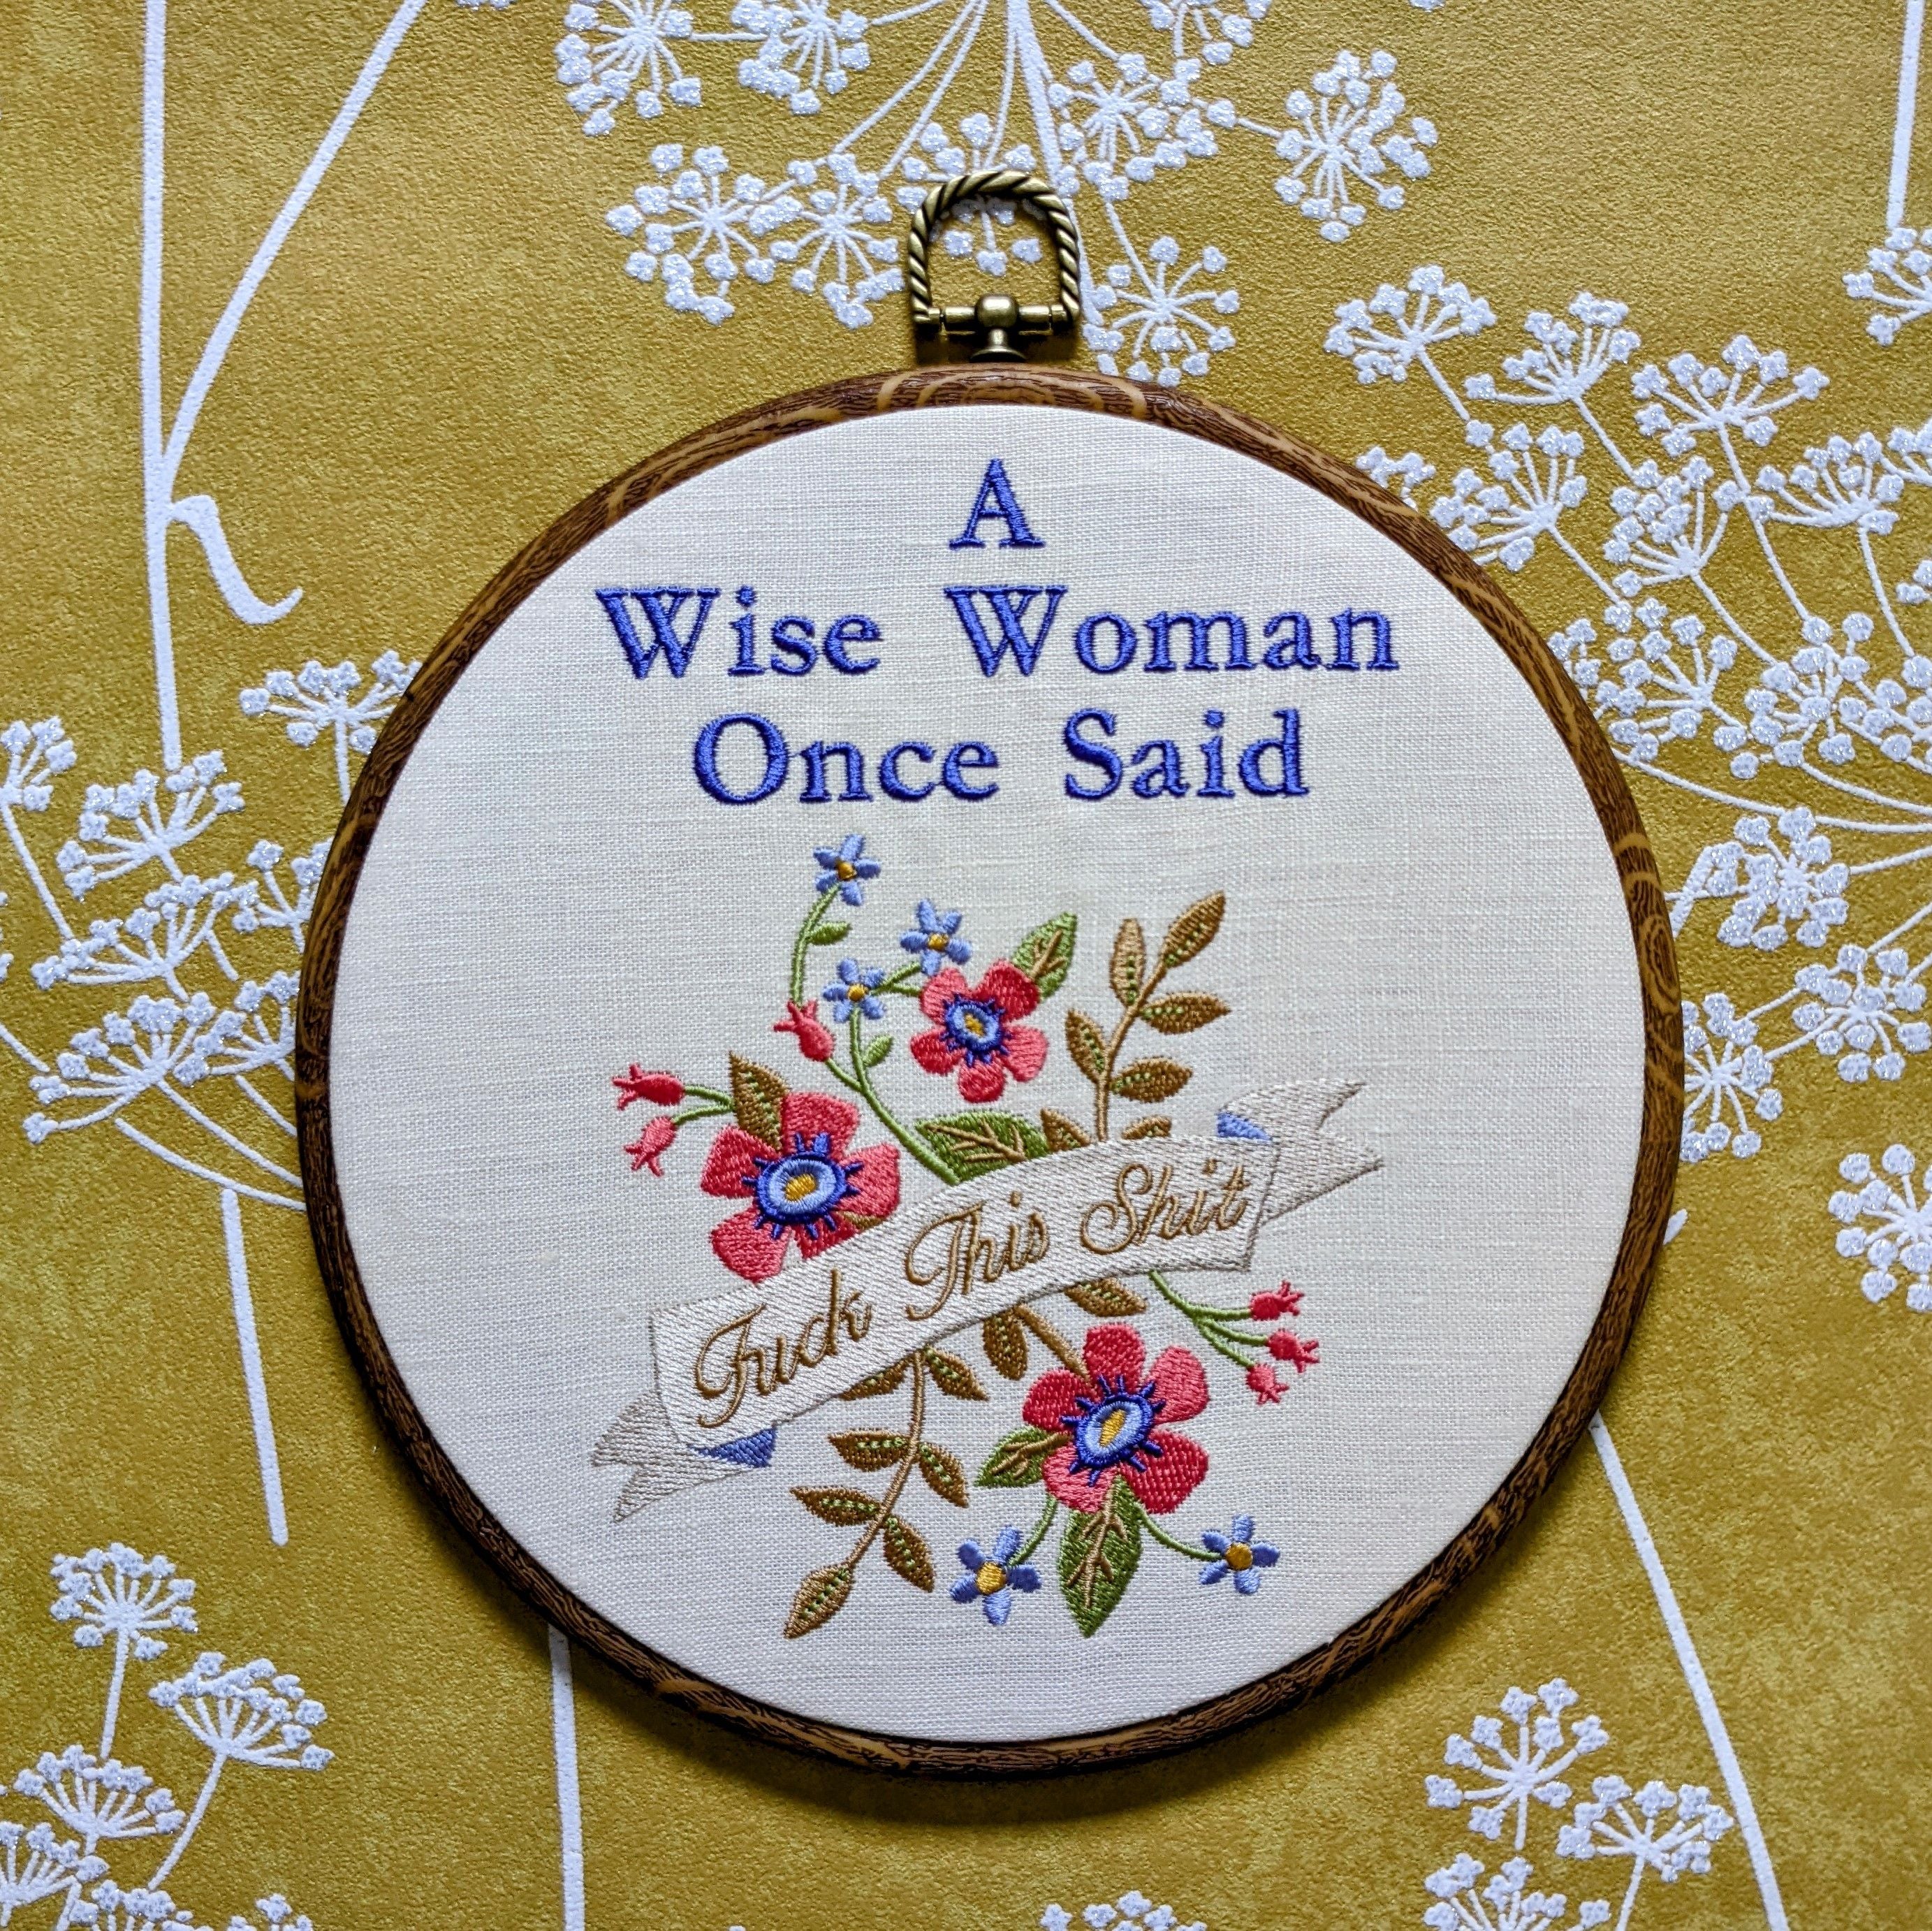 A wise woman once said, Machine embroidery 8" hoop art